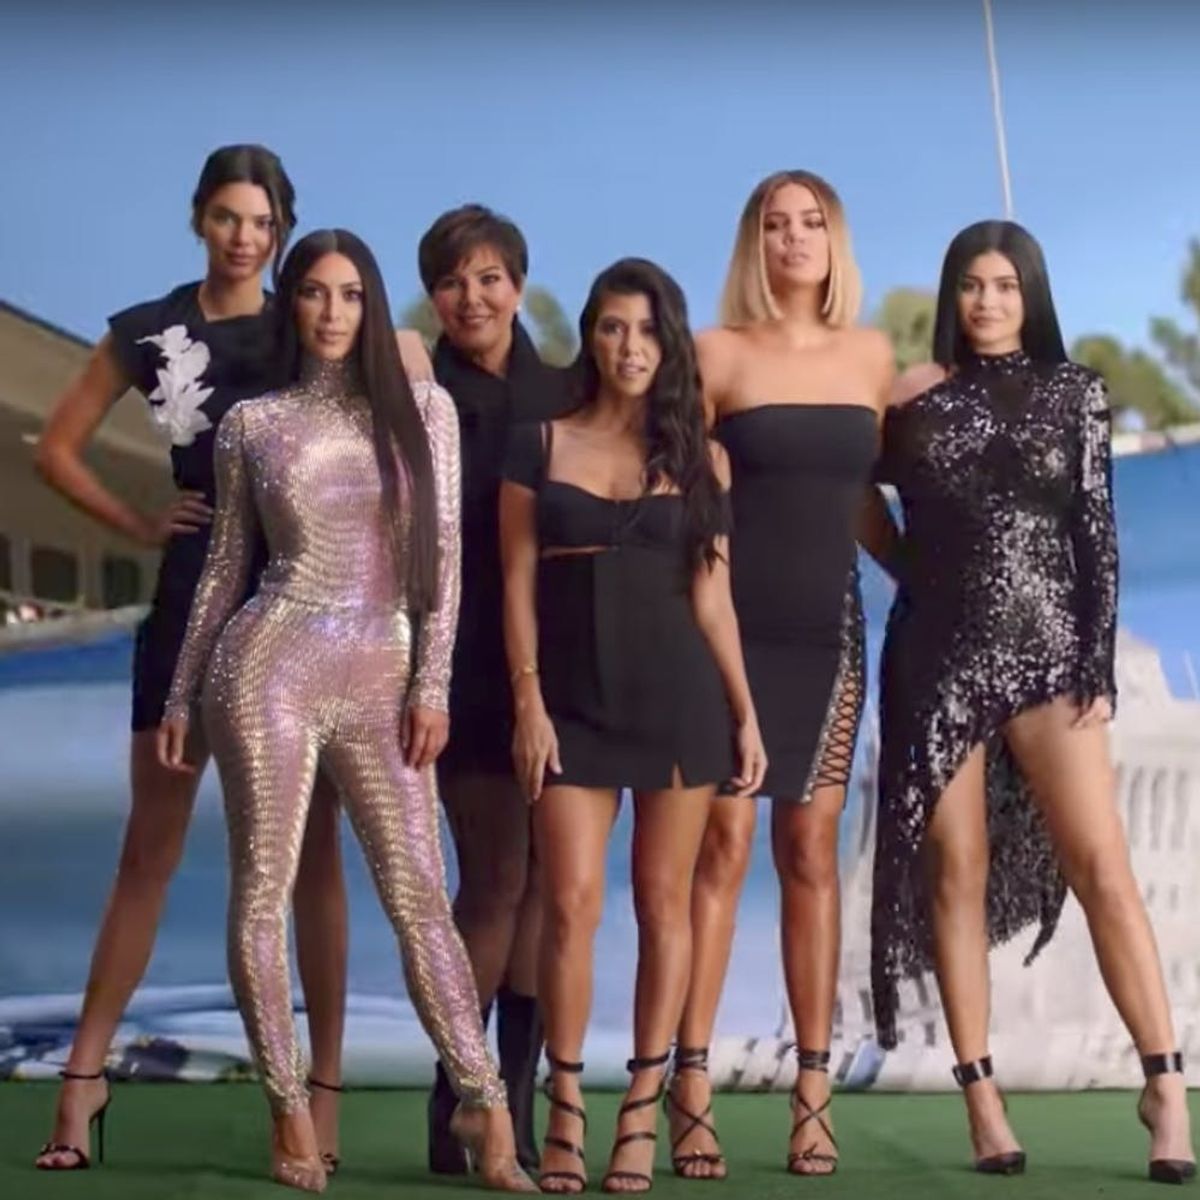 “Keeping Up With the Kardashians” Teases Its 10th Anniversary With a Nostalgic Look Back